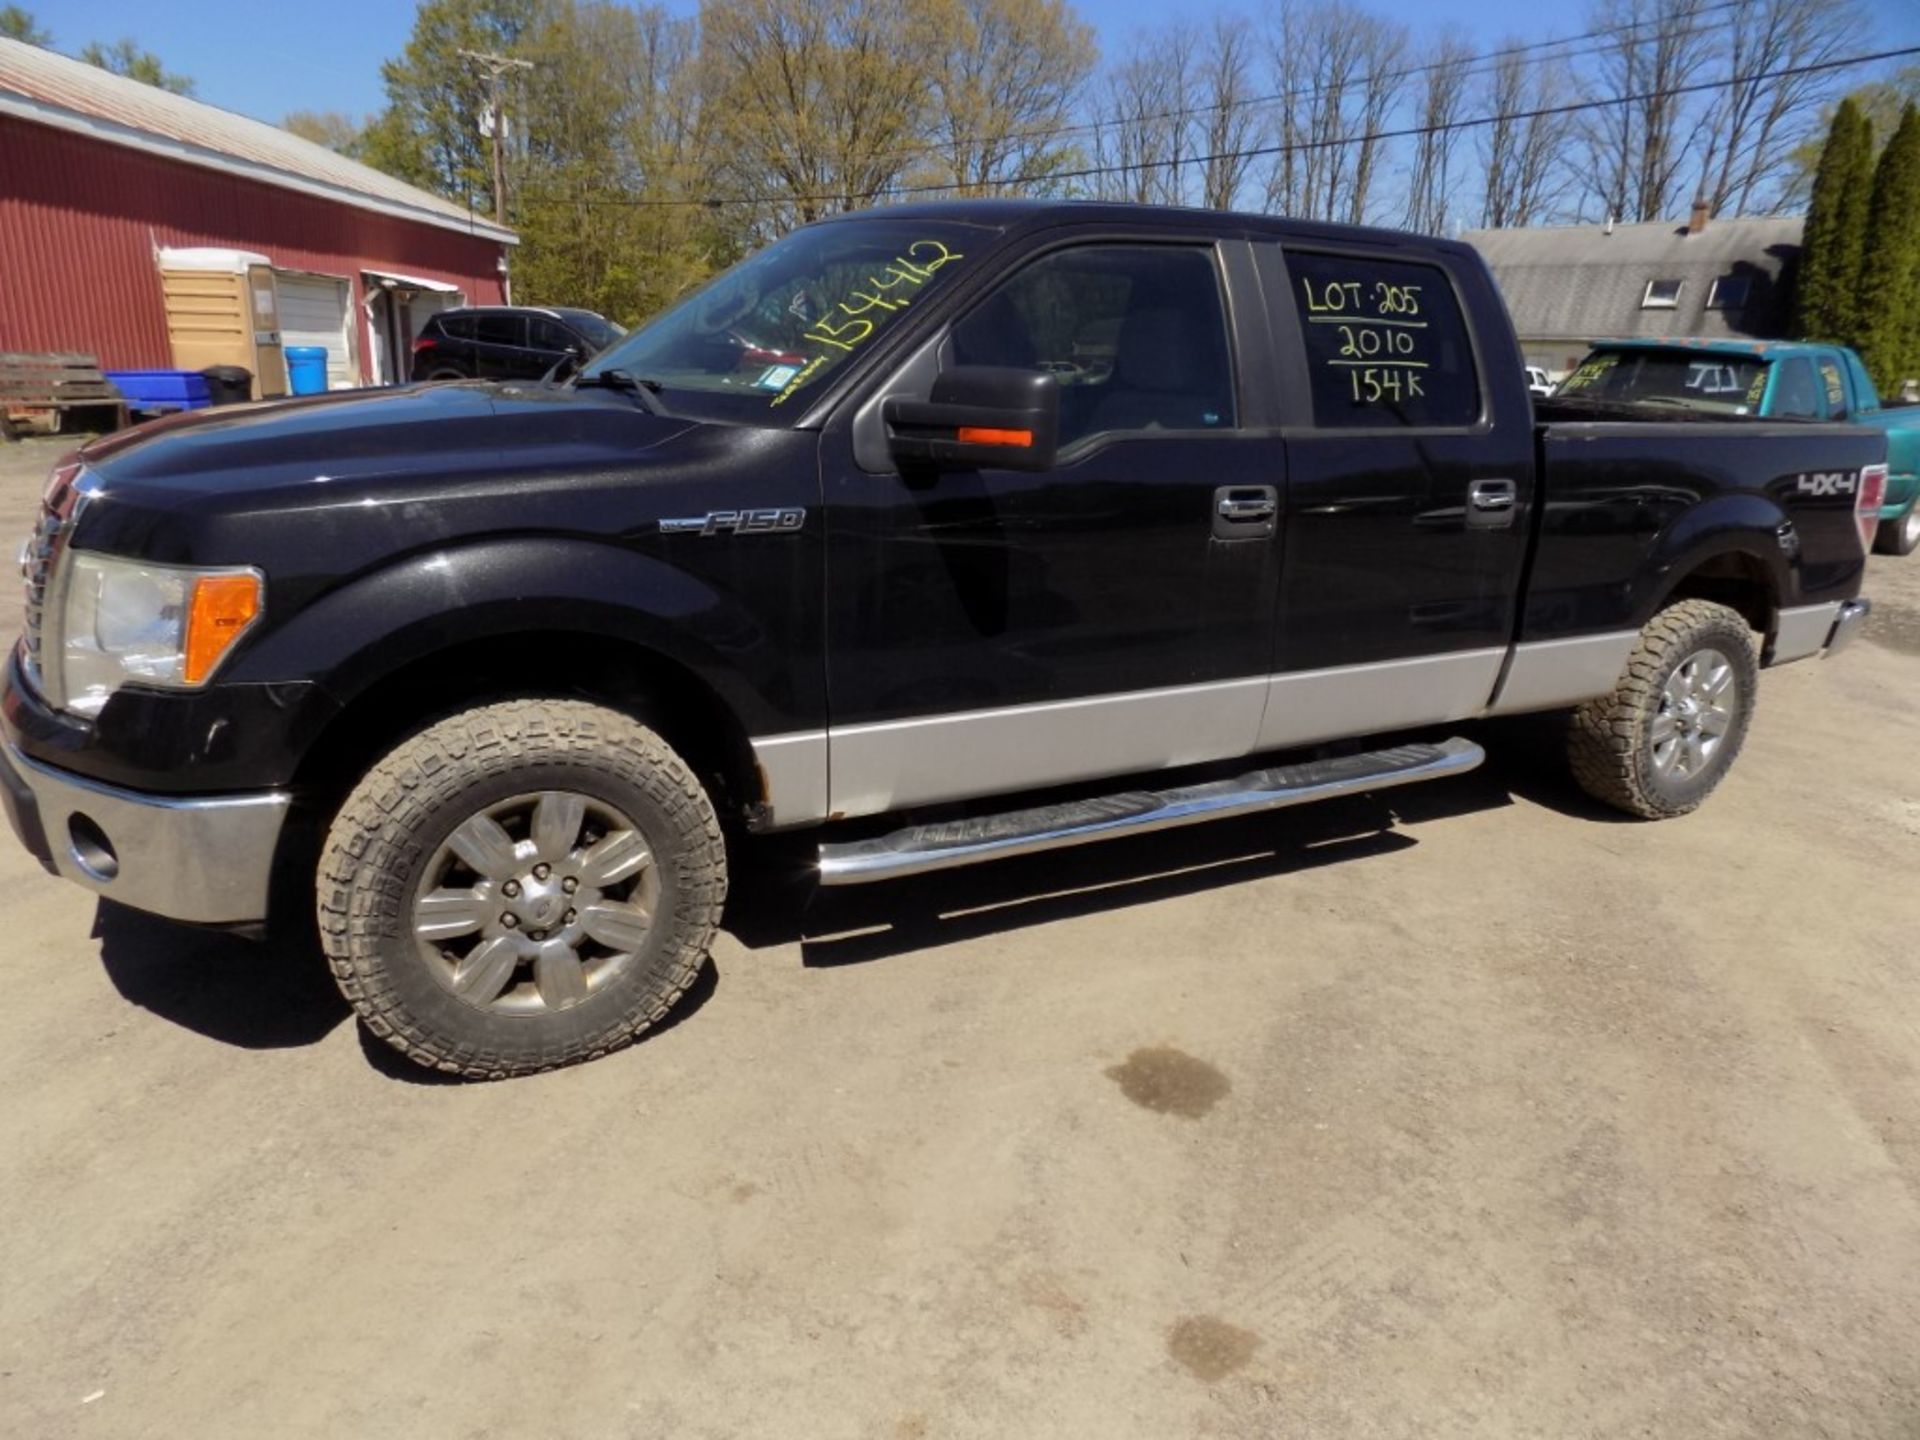 2010 Ford F150 XLT, 4x4 Crew Cab, Black, 154,412 Miles, VIN#:1FTFW1EV3AFD37943, AGGRESSIVE TIRES ARE - Image 2 of 4